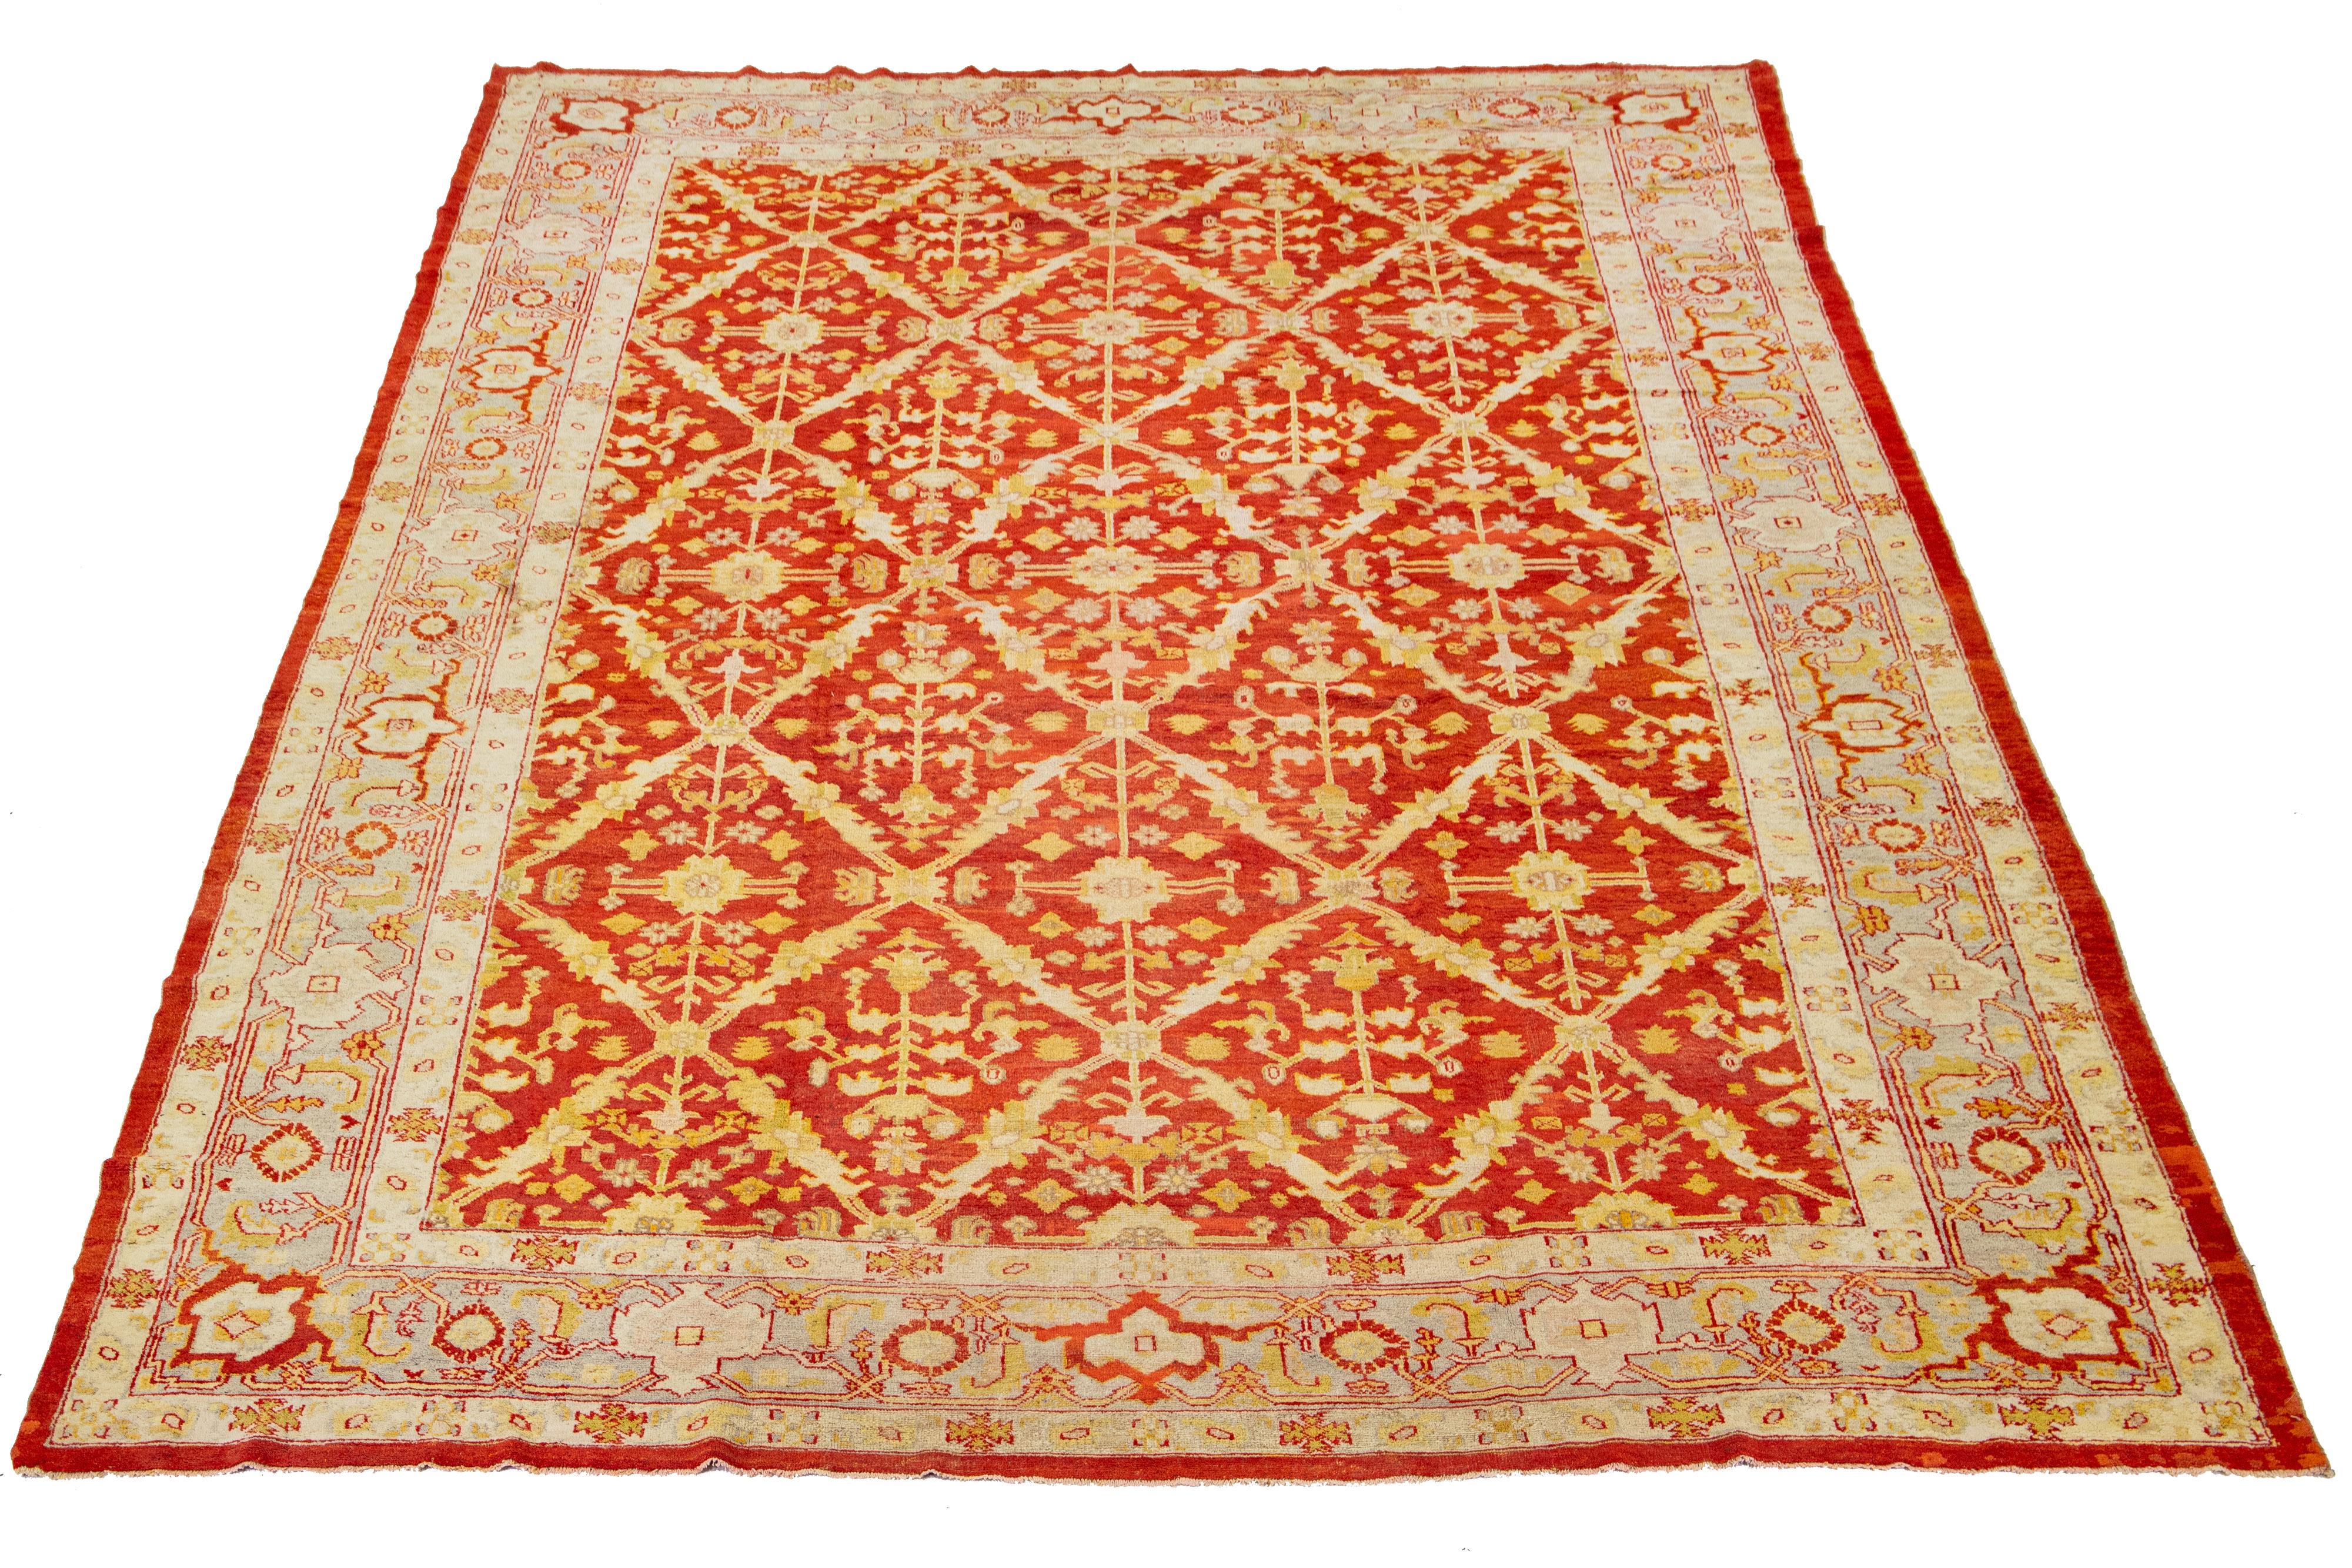 This antique Turkish wool rug is exceptional with its charming red base color and meticulous hand-knotted craftsmanship. It showcases stunning yellow-gold, beige, and gray accents, displaying a captivating floral pattern.

This rug measures 12'3